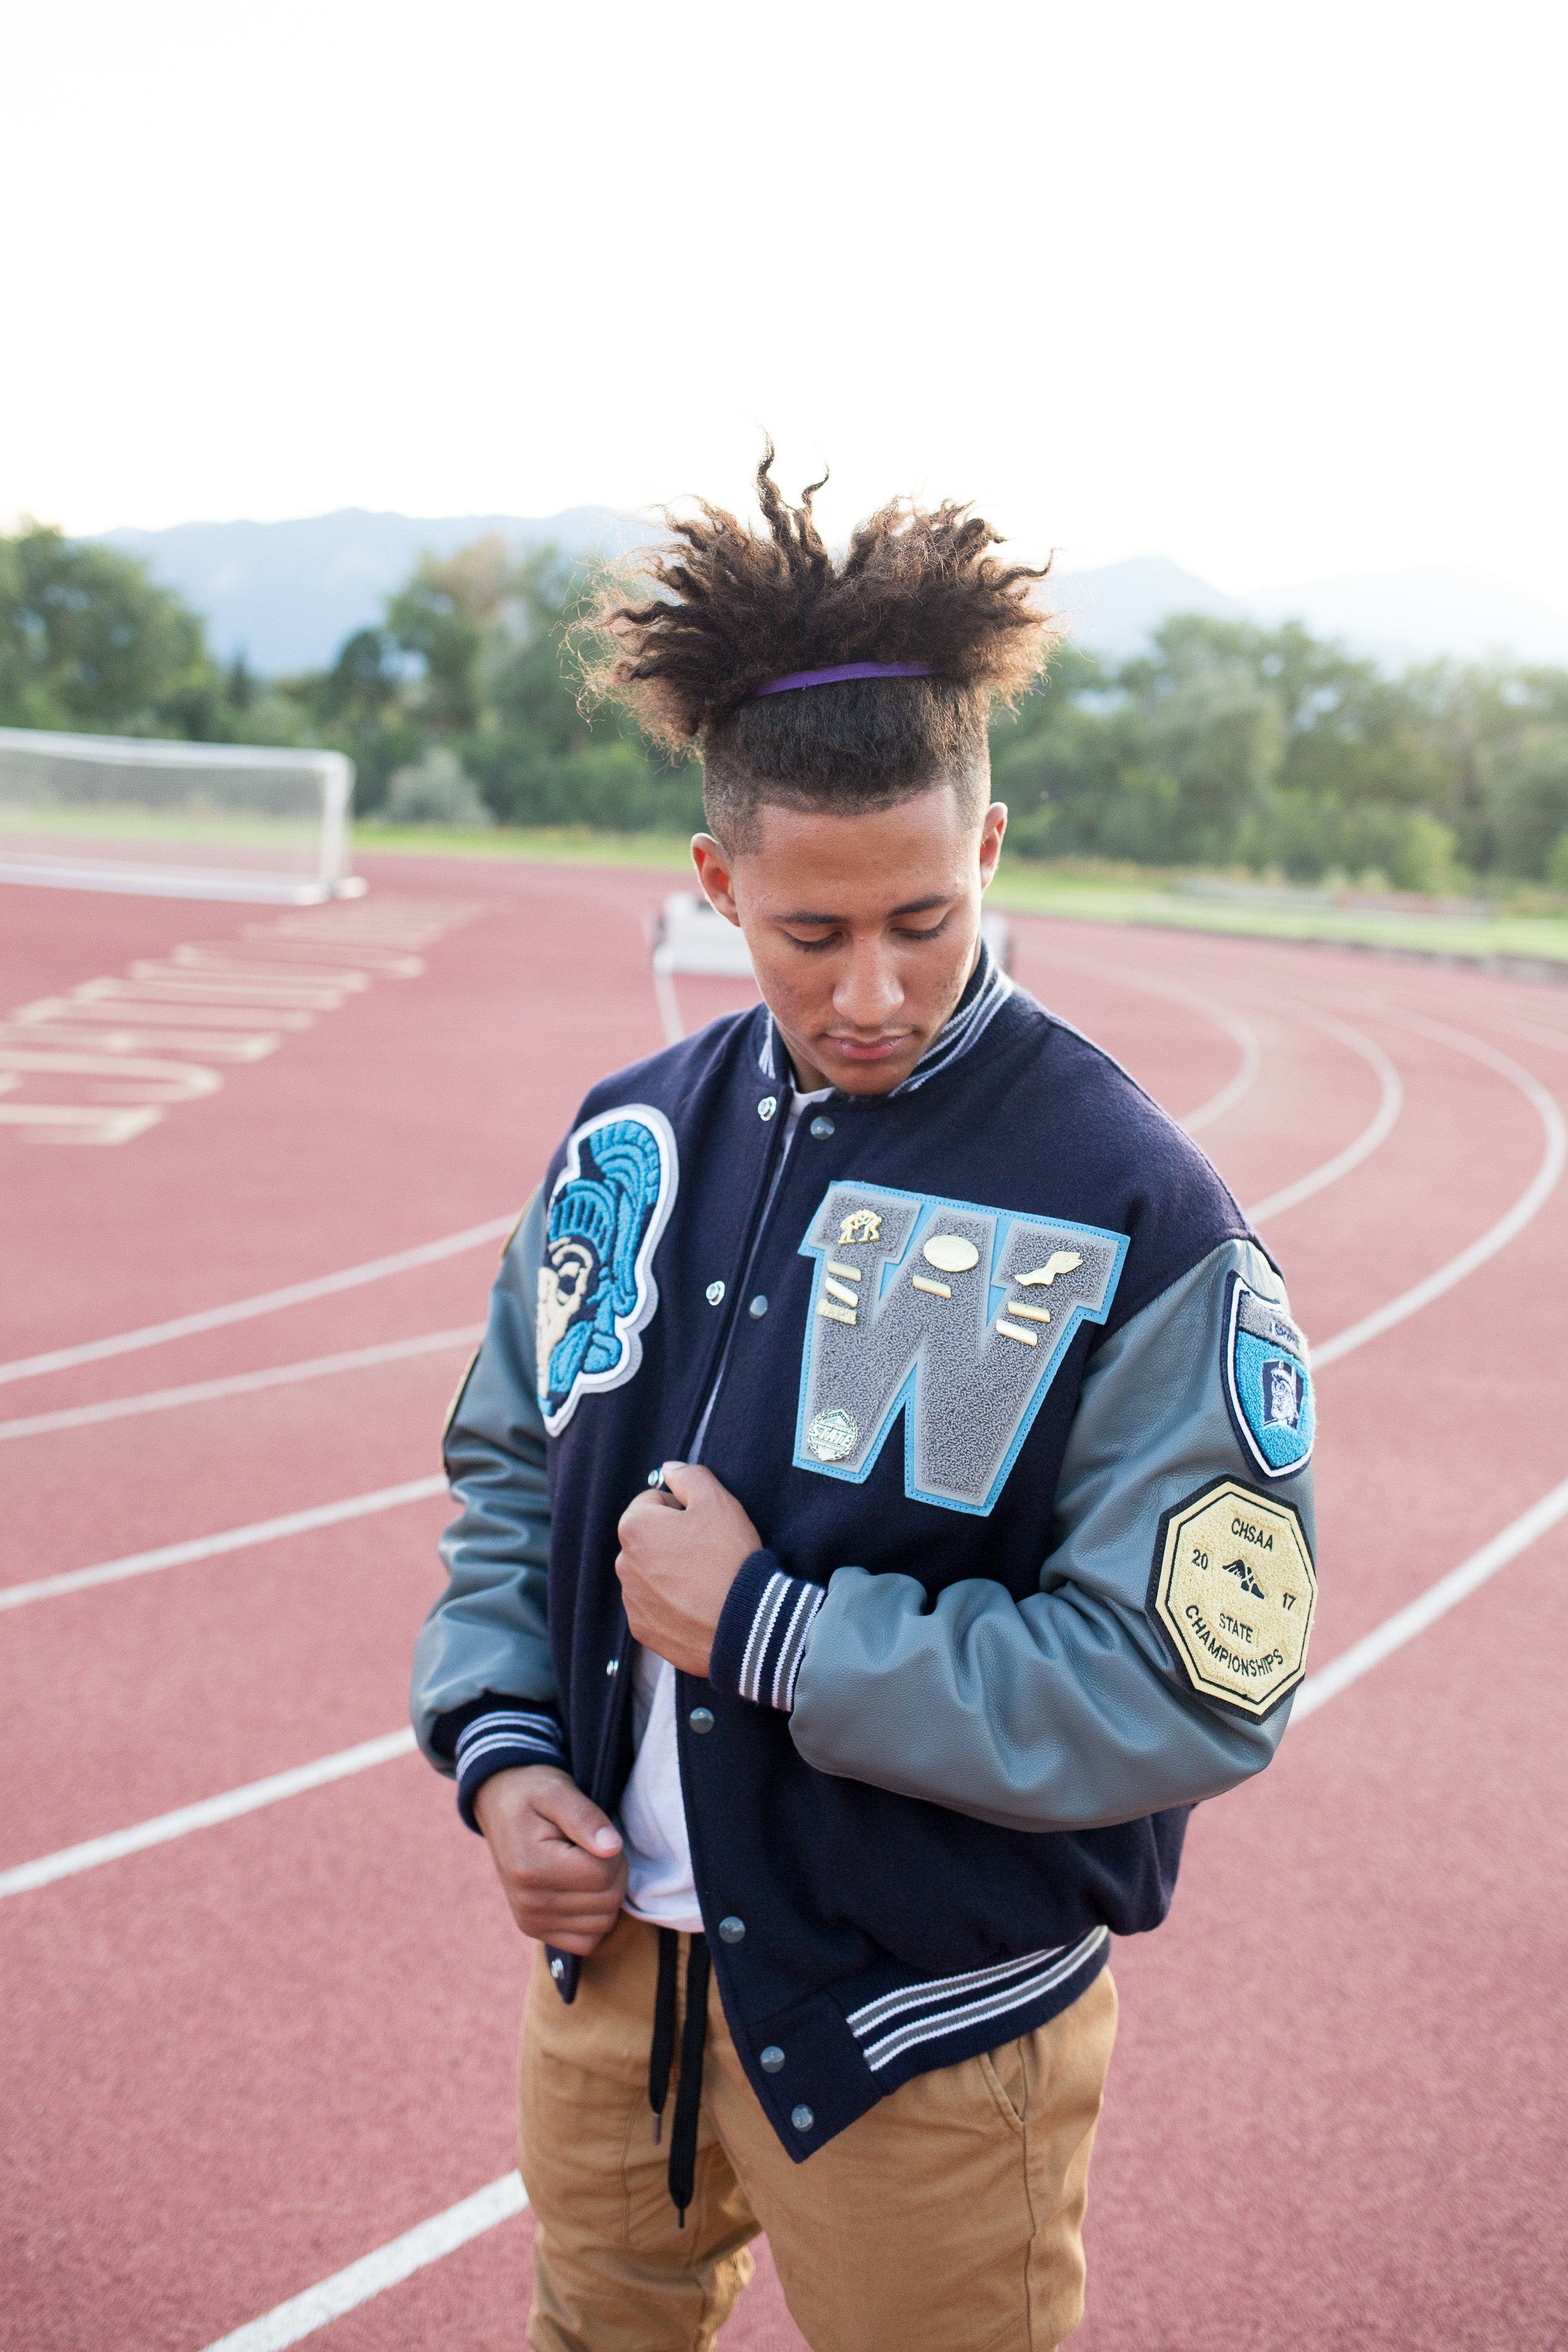 Senior in varsity jacket looking at his badges and pins while standing on a track. Stacy Carosa Photography Colorado Springs senior photography